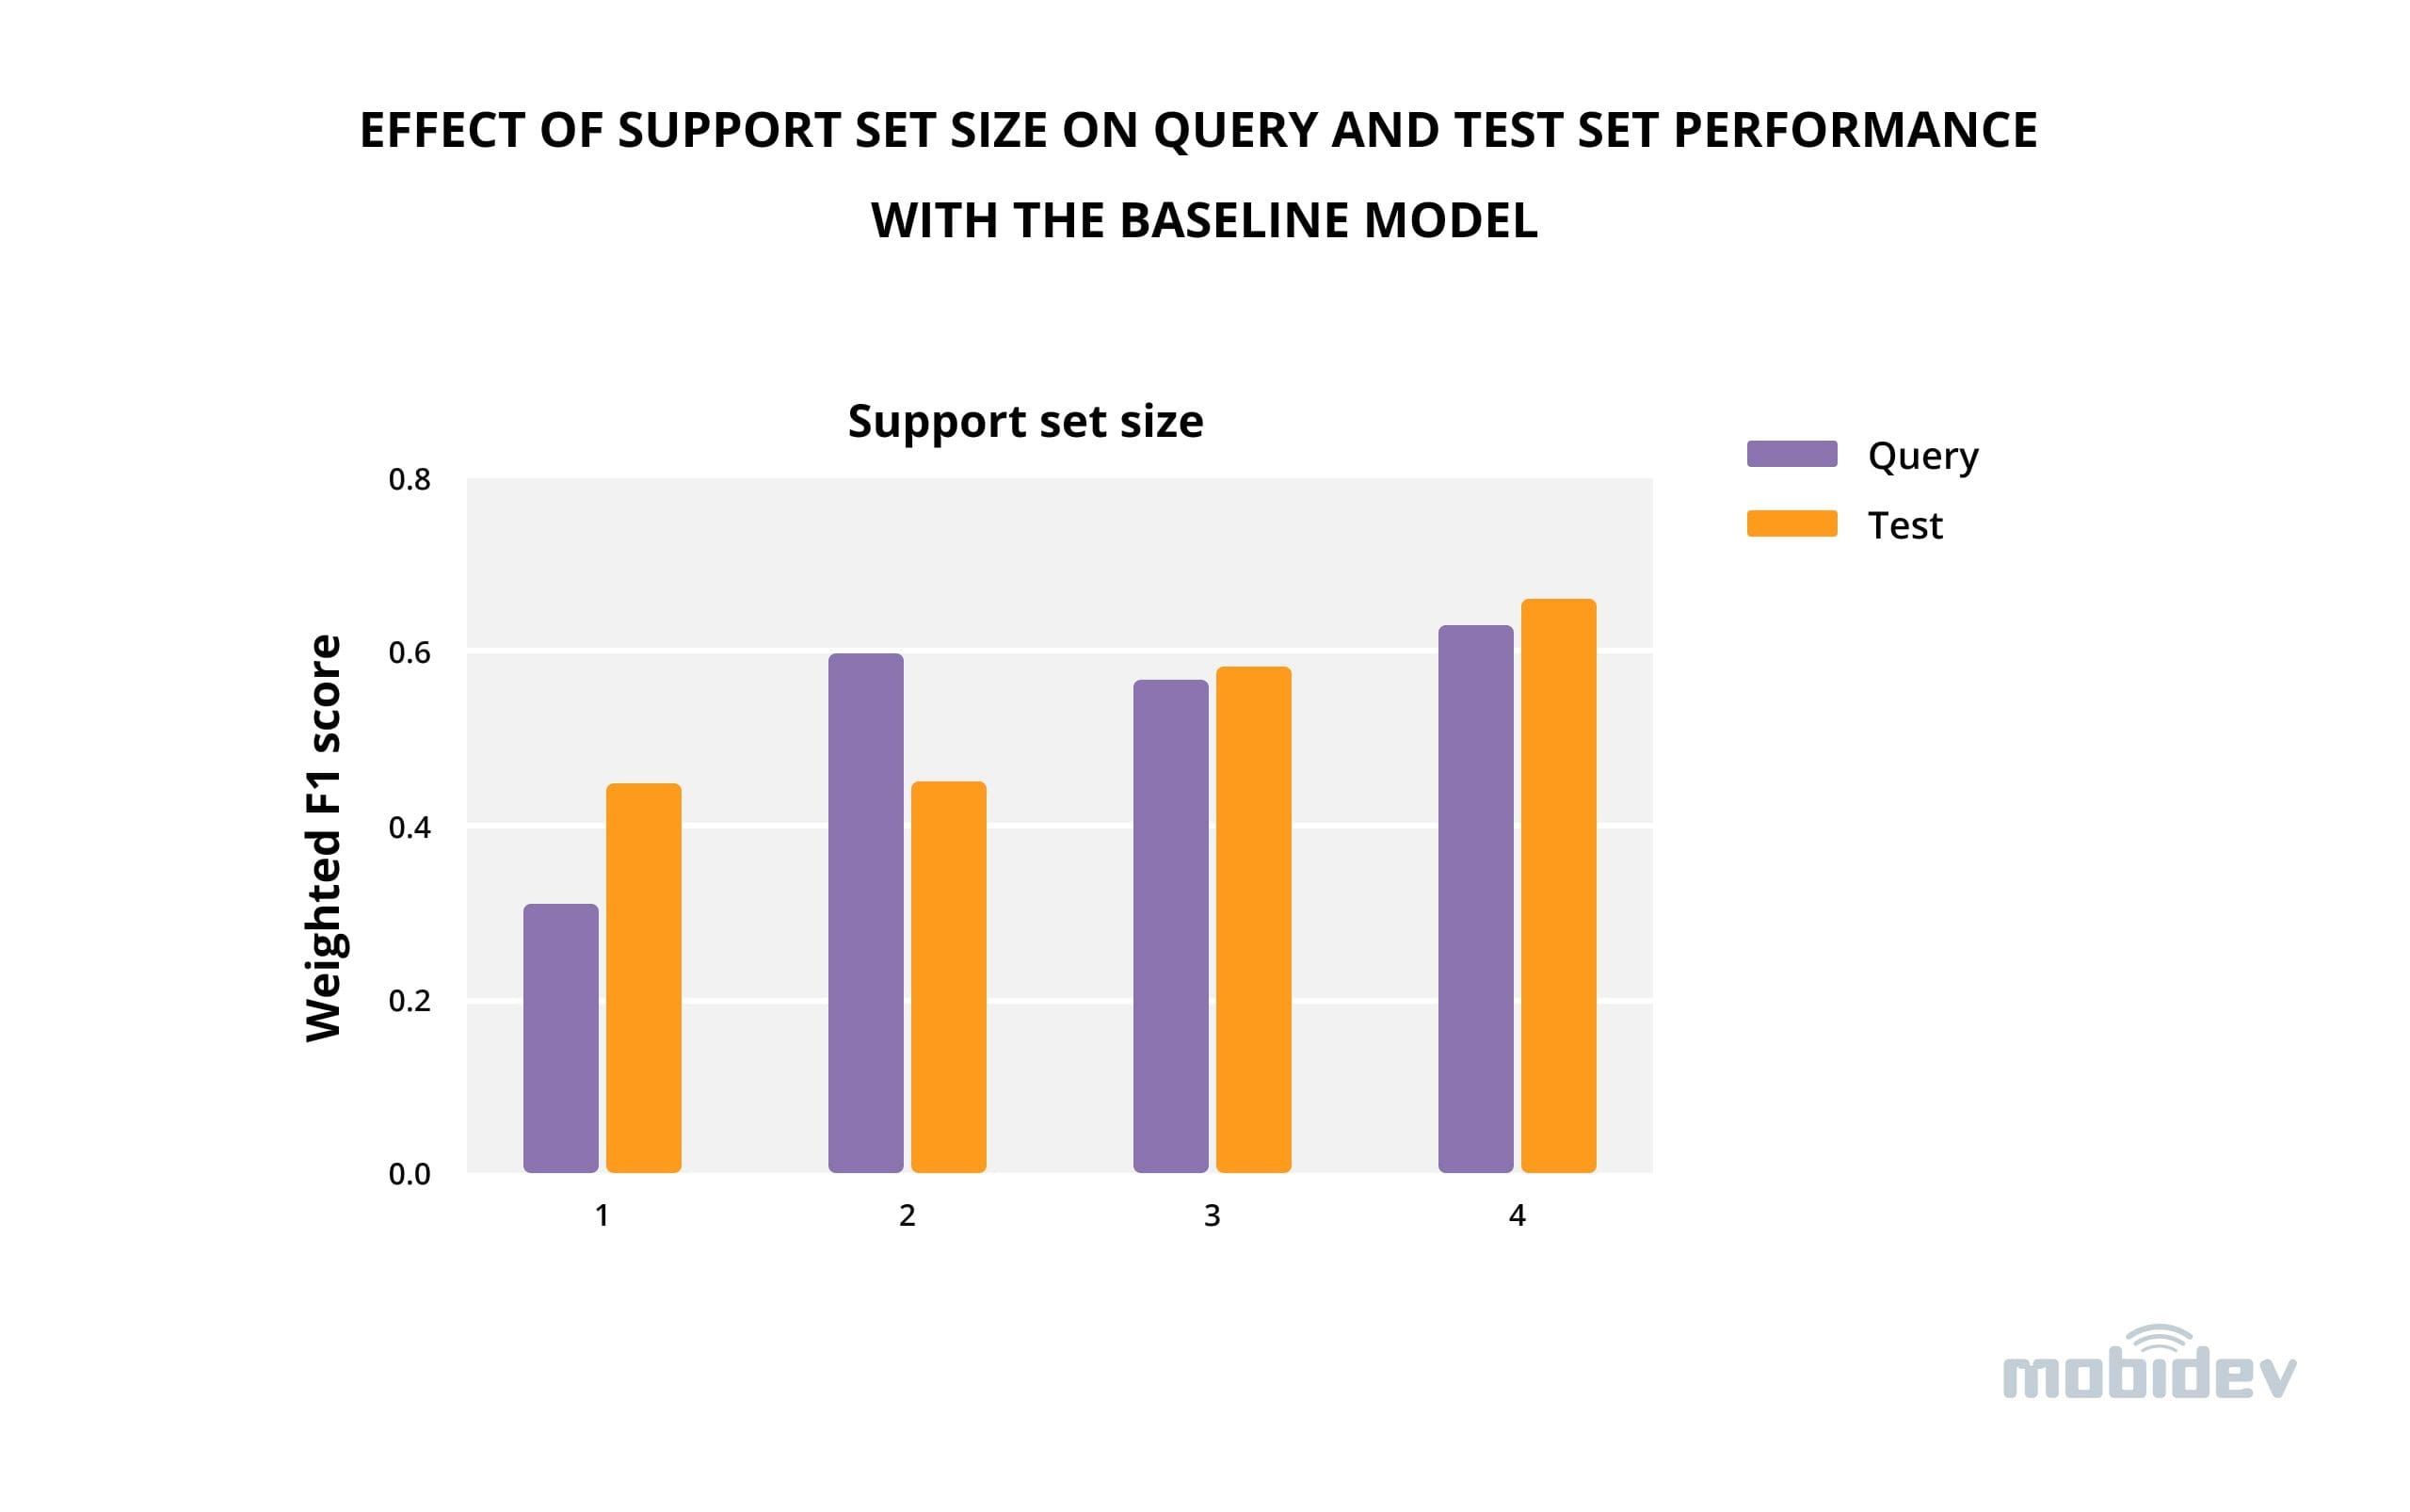 Figure 5. Effect of support set size on query and test set performance with the baseline model